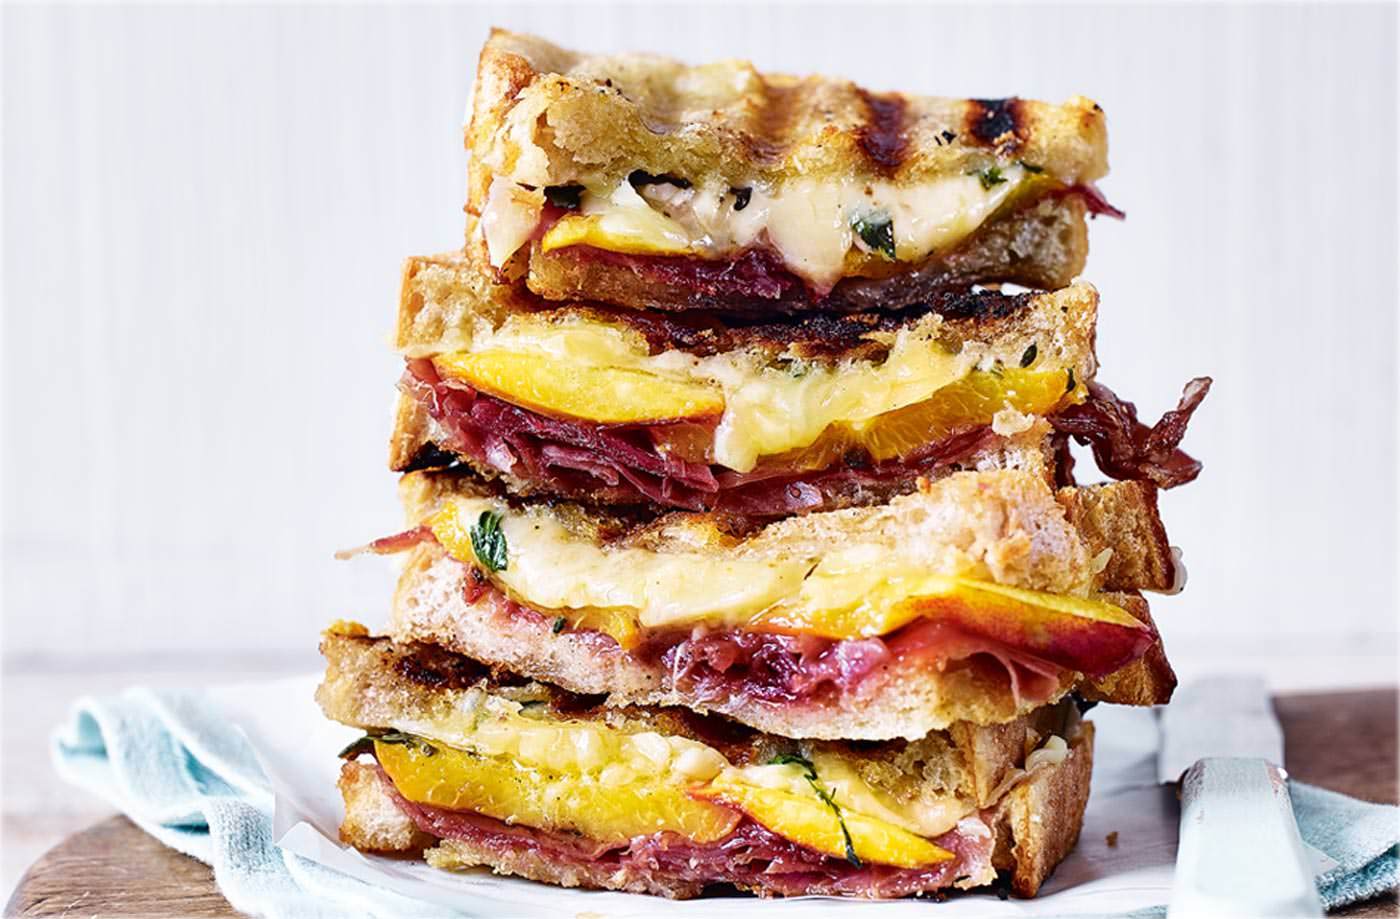 Sarnies don’t have to be strictly savoury affairs – Prosciutto, nectarine and thyme grilled cheese sandwich